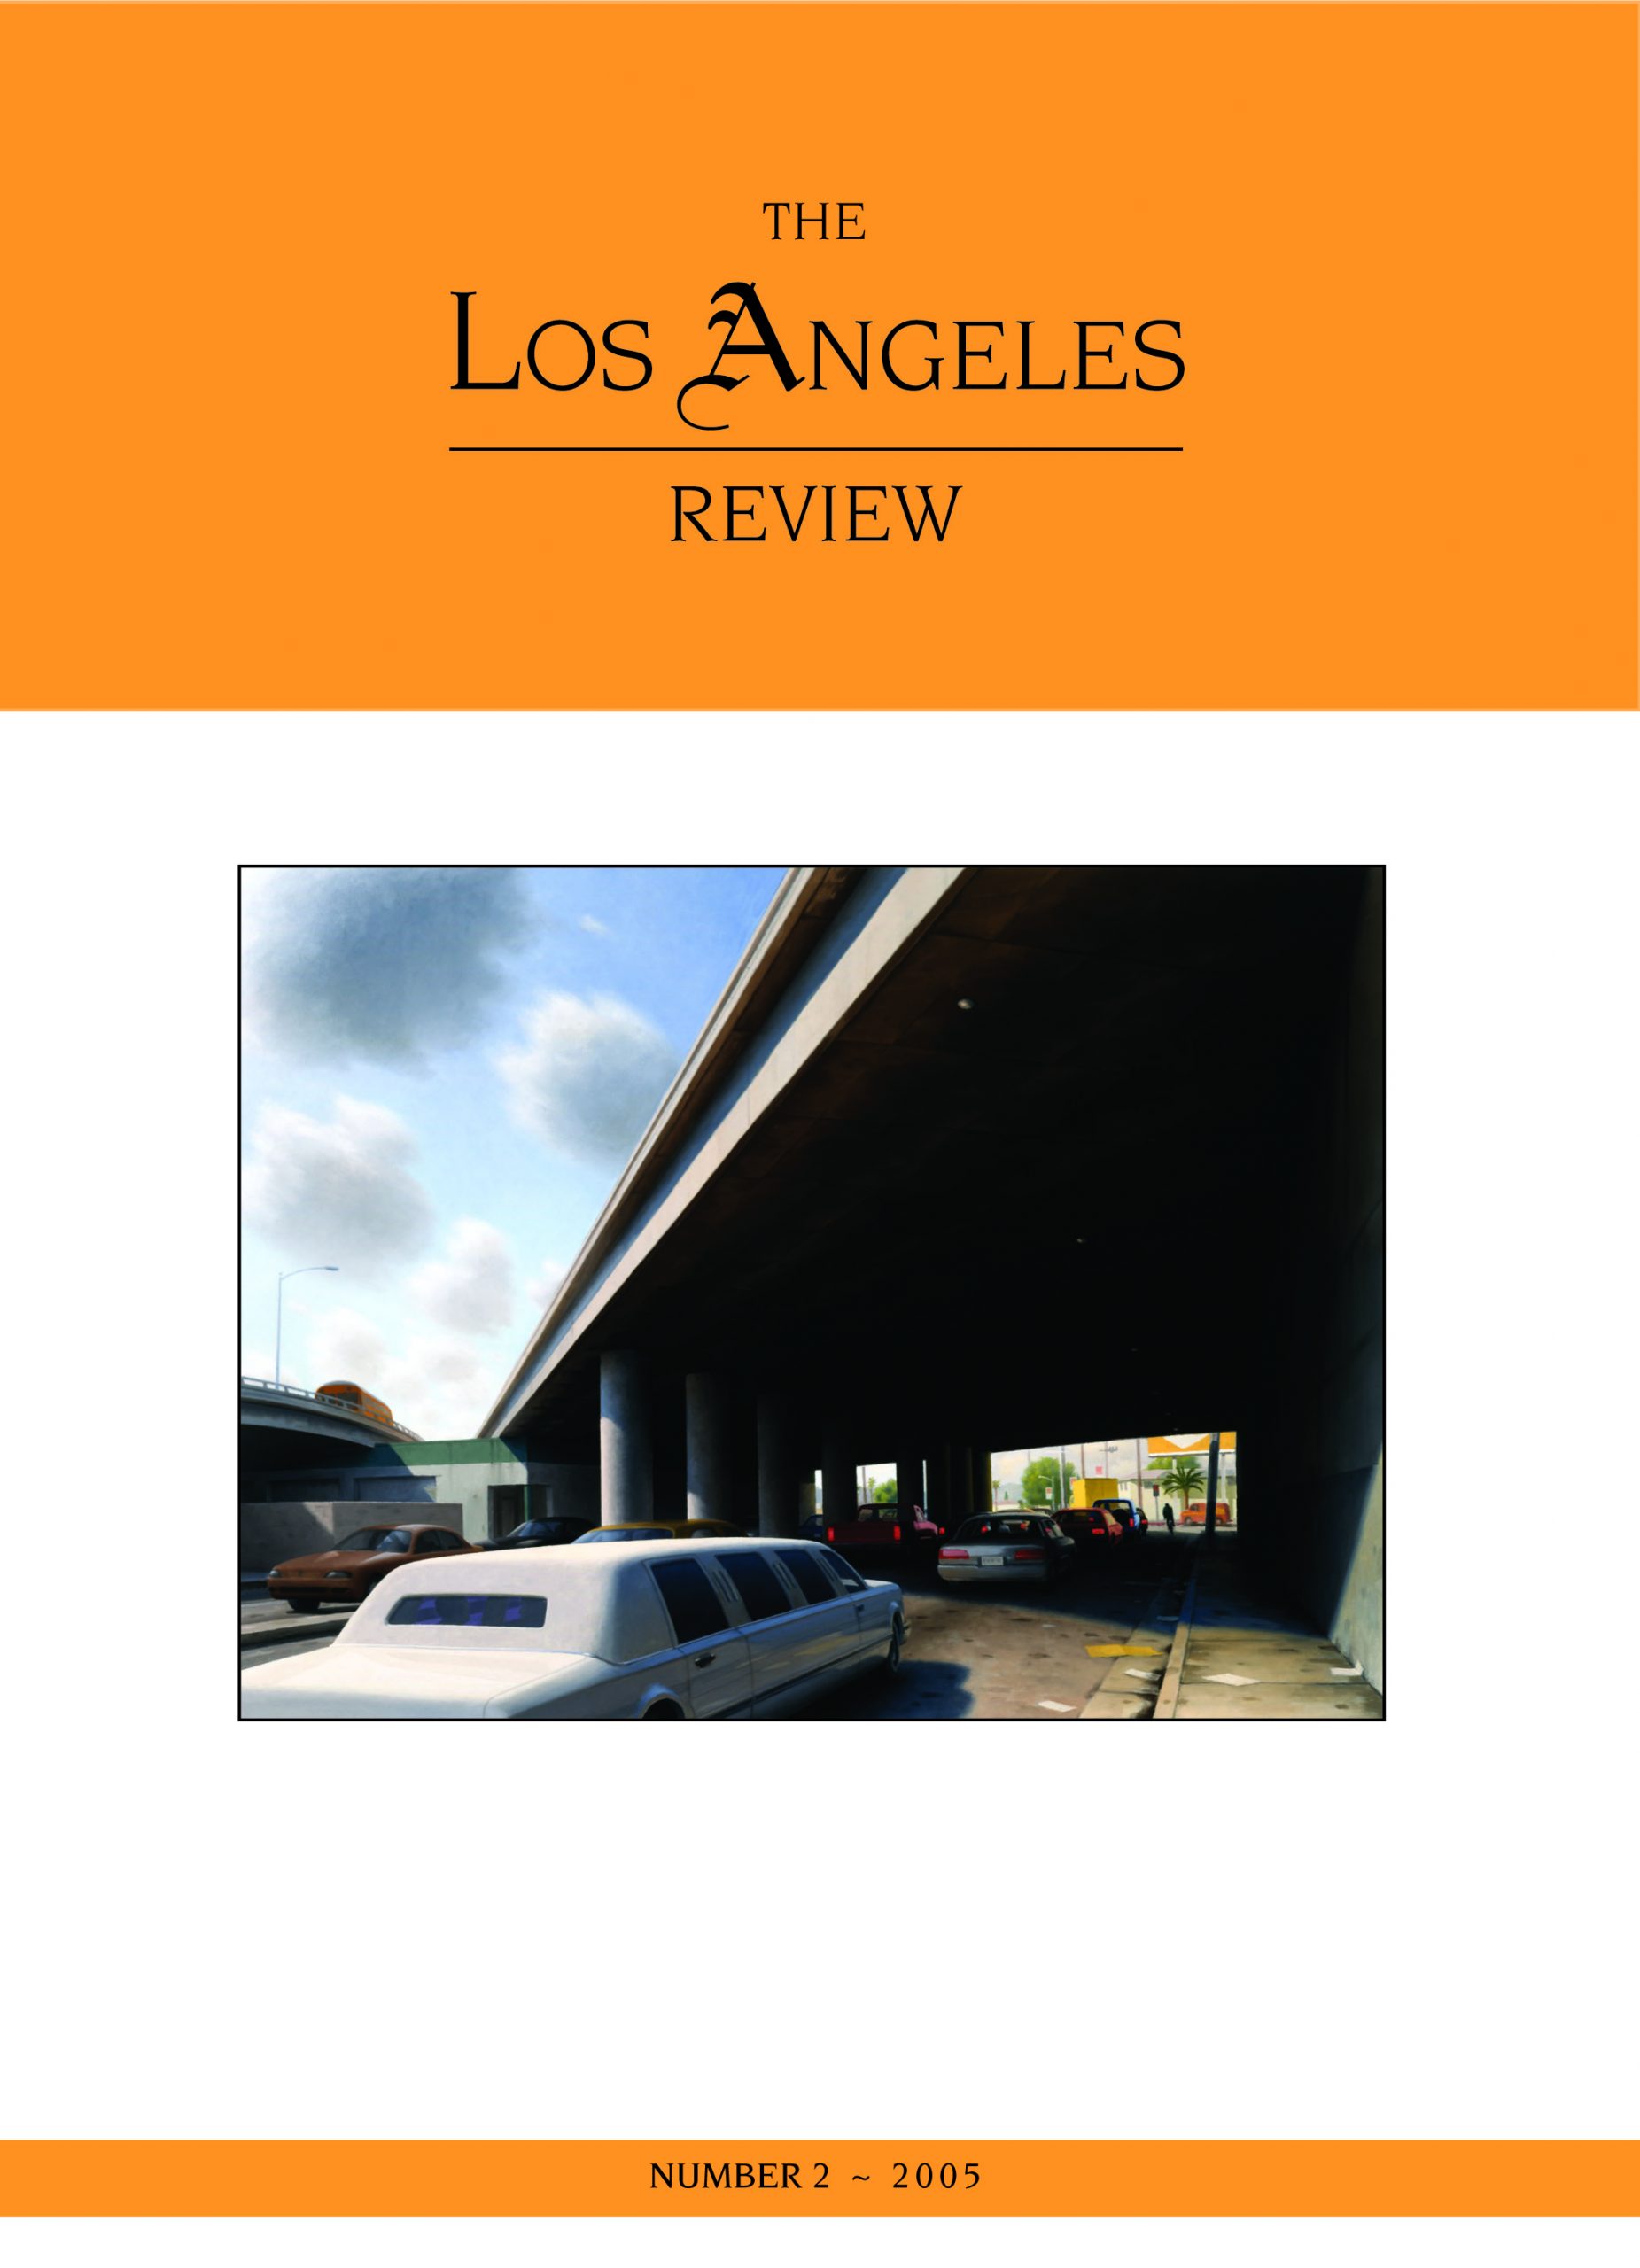 Black text stating The Los Angeles Review Number 2 -- 2005 over an orange background with the centered image of a white limo driving under an overpass.